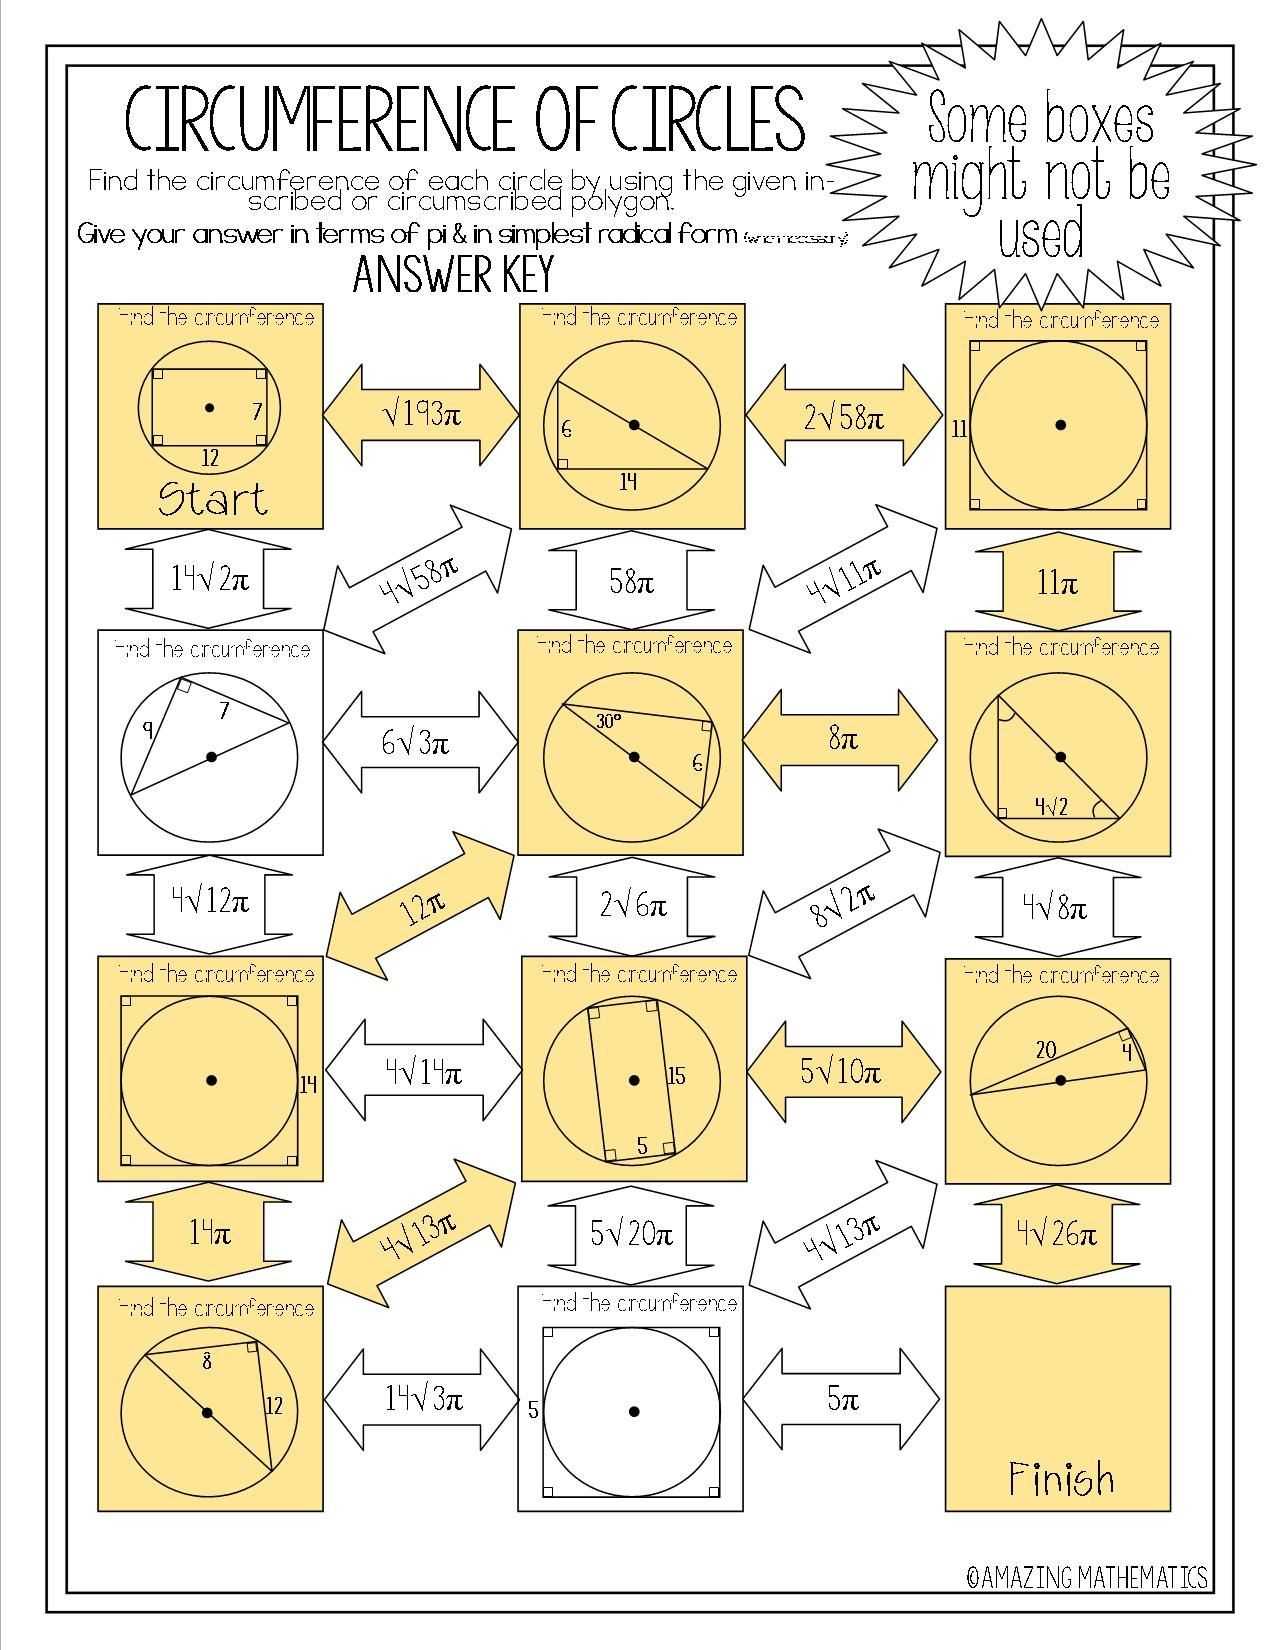 Circles Worksheet Answers together with Printable Math Maze Games New Circumference Circles Maze Using